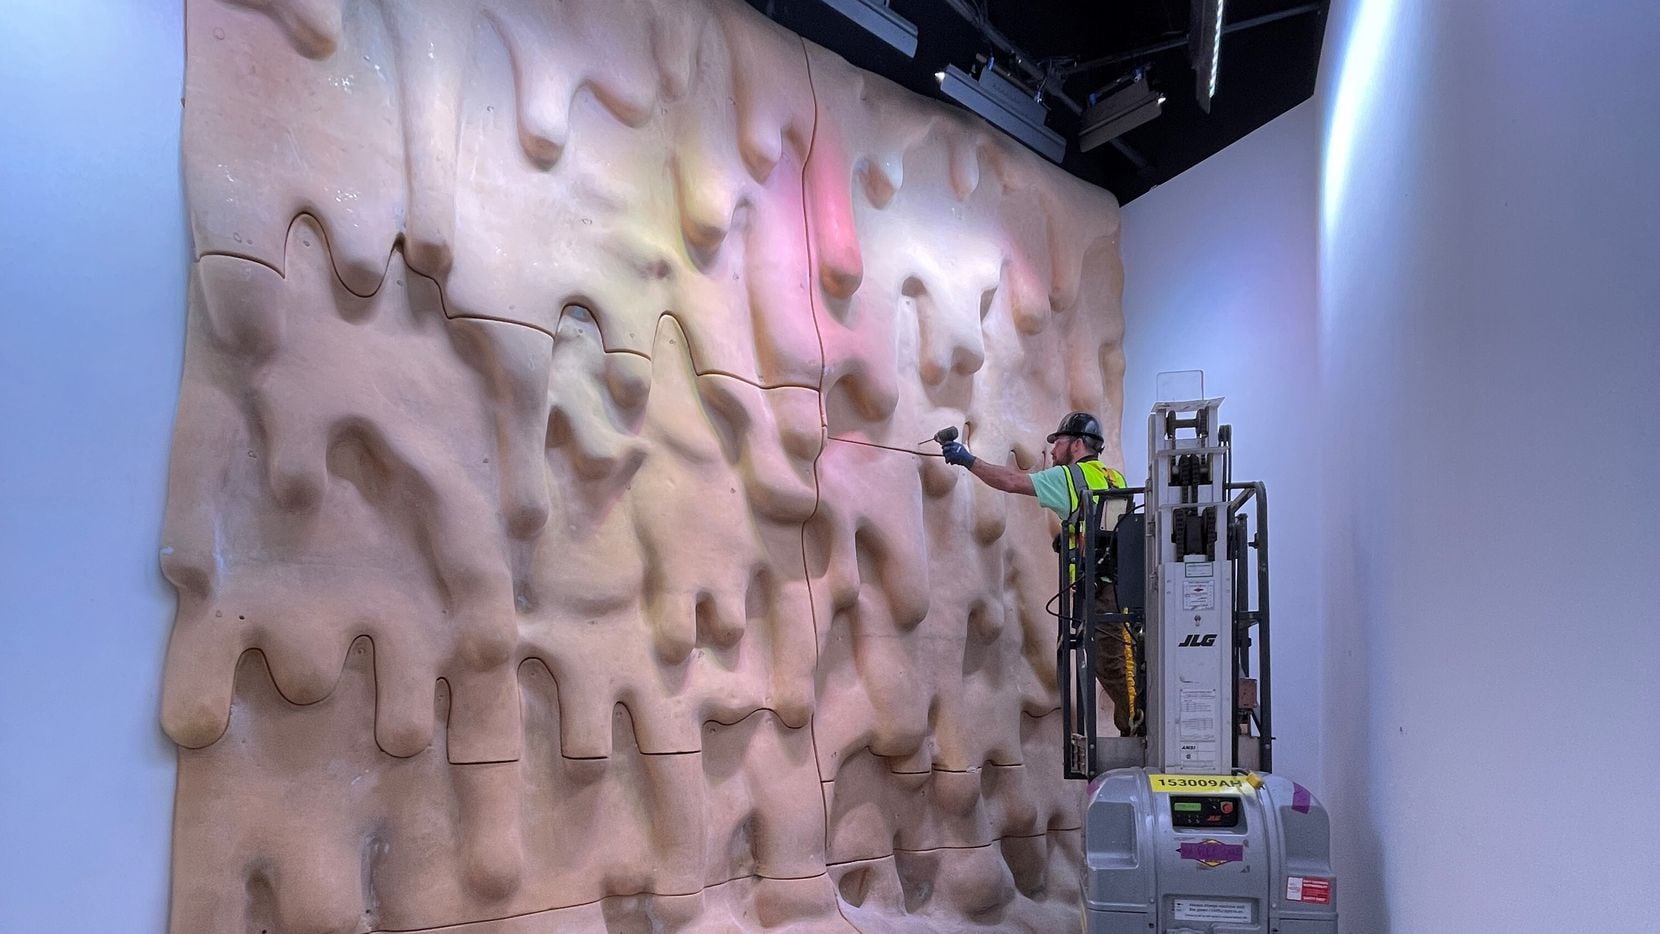 A crew works to install Dan Lam's dripping wall design at Meow Wolf Grapevine. The immersive...